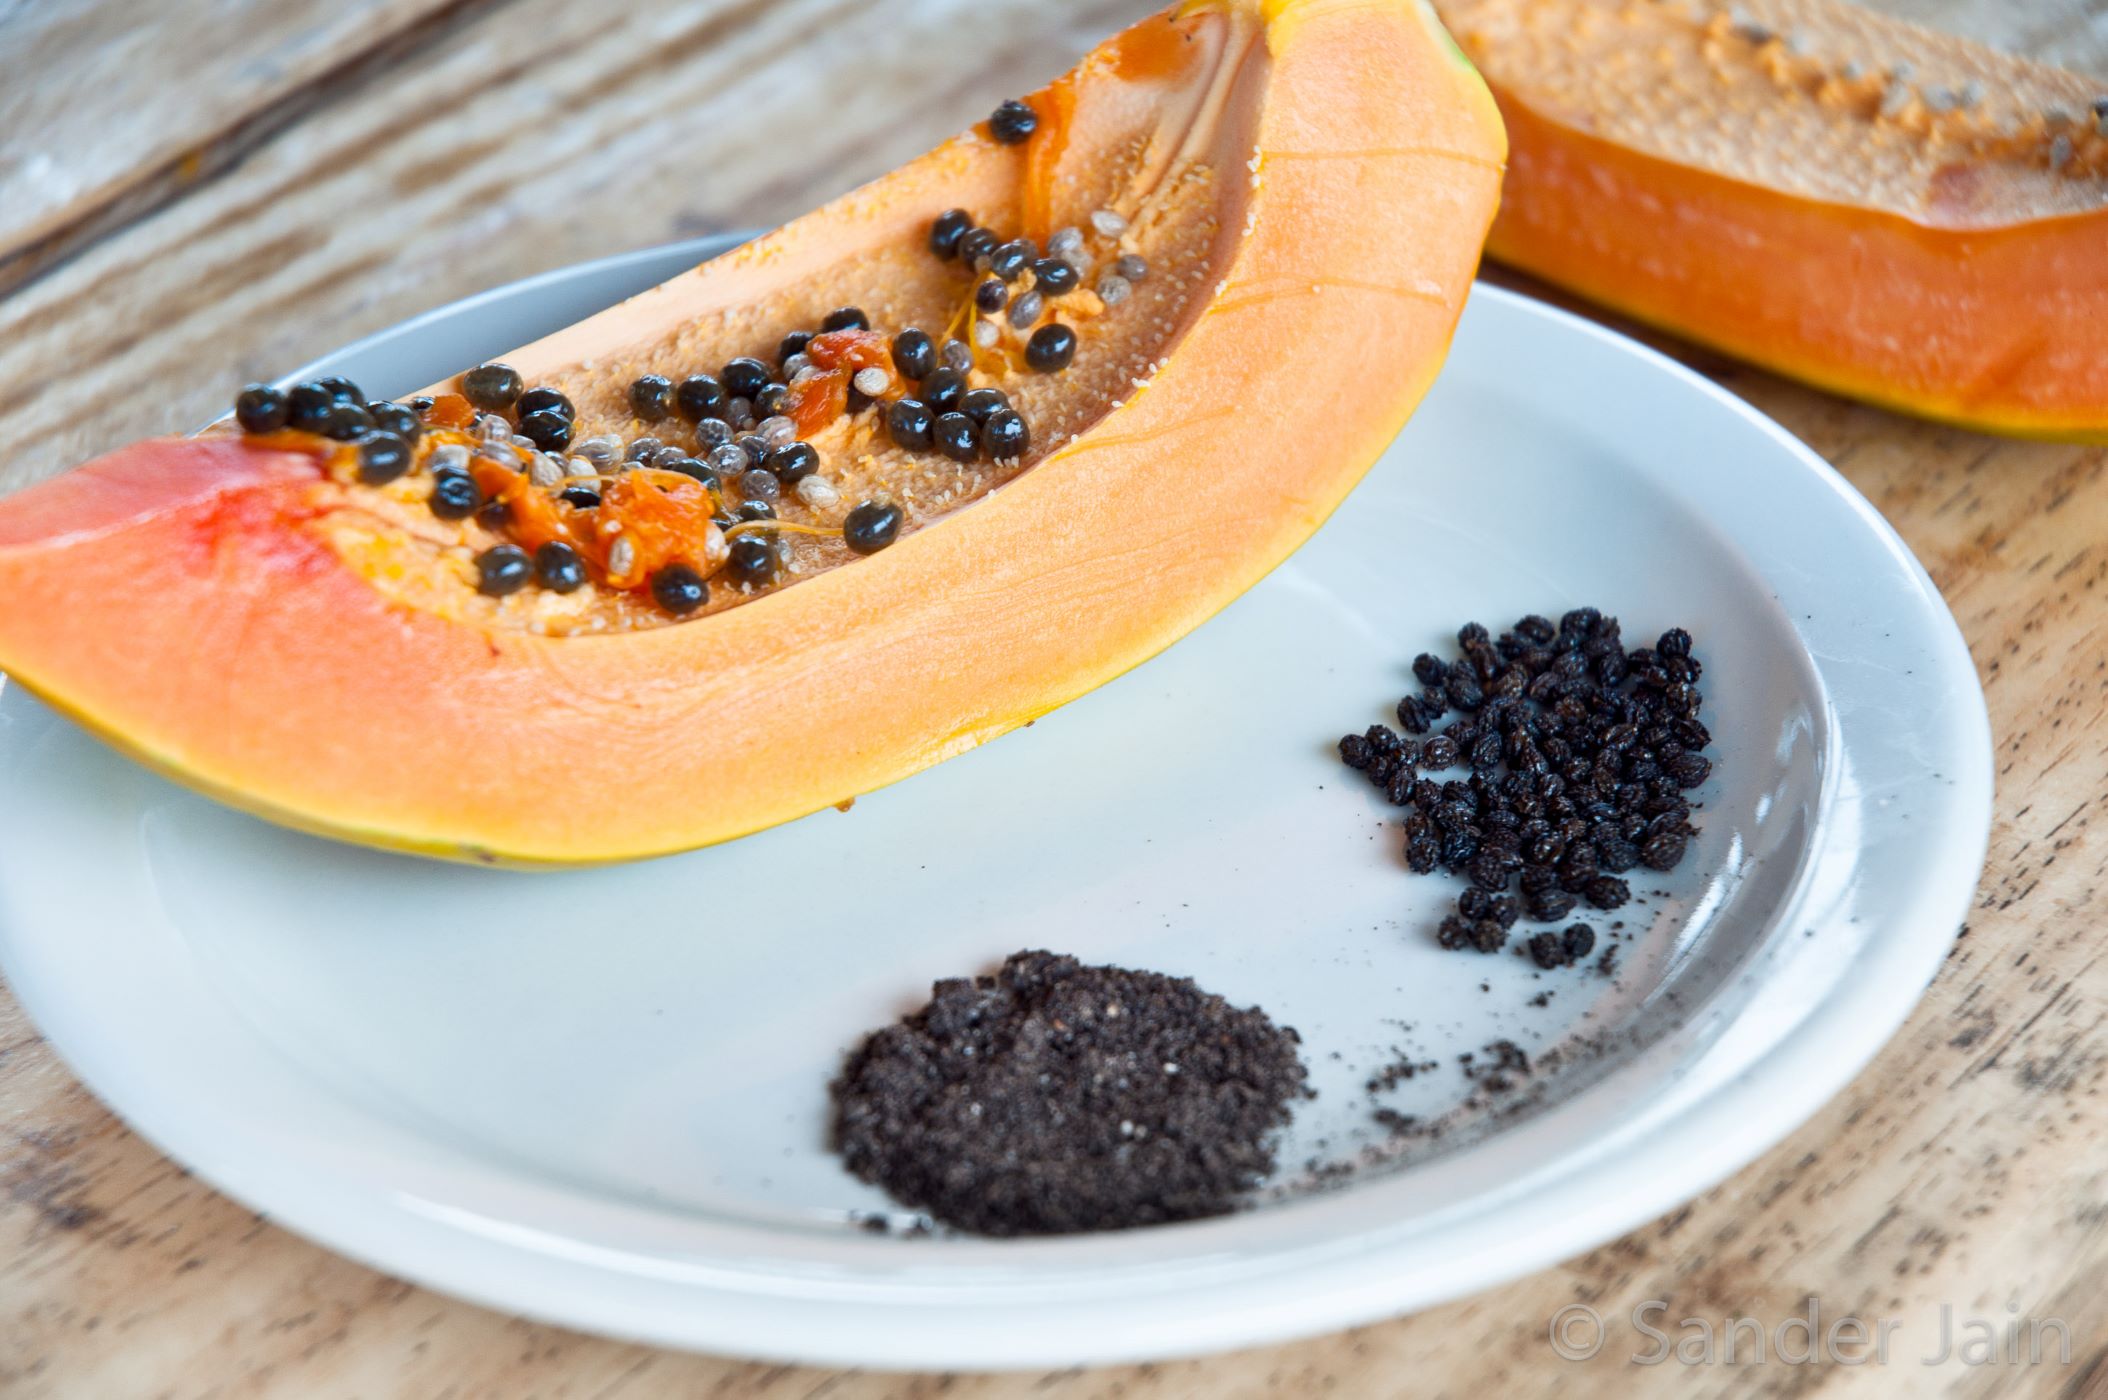 How Long Does It Take For Papaya Seeds To Kill Parasites